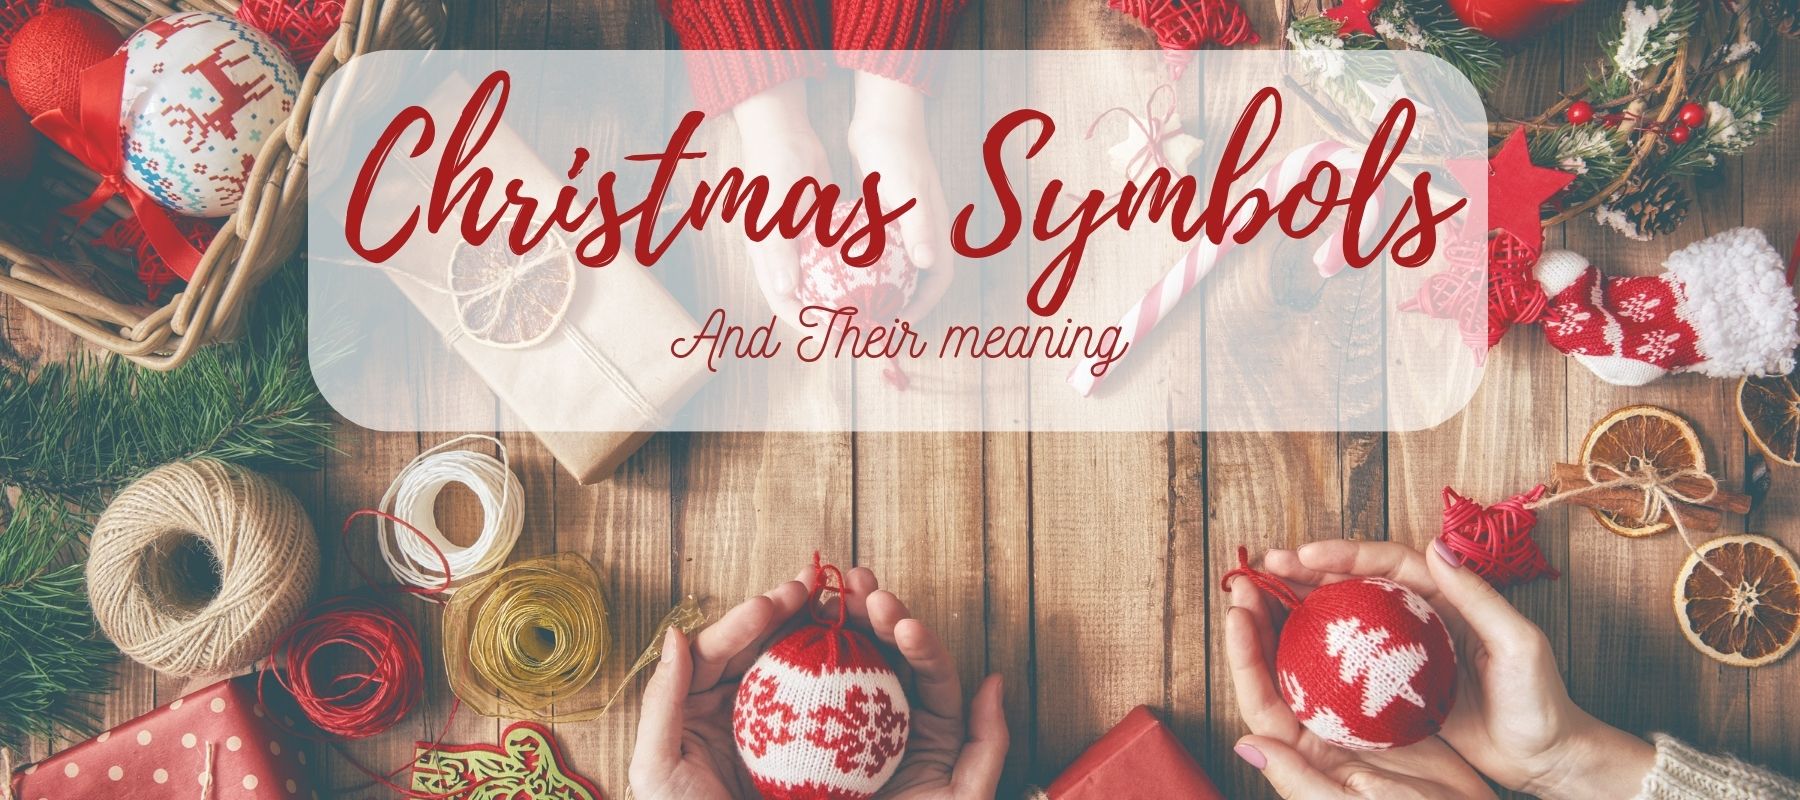 25 Christmas Symbols and Their Meanings